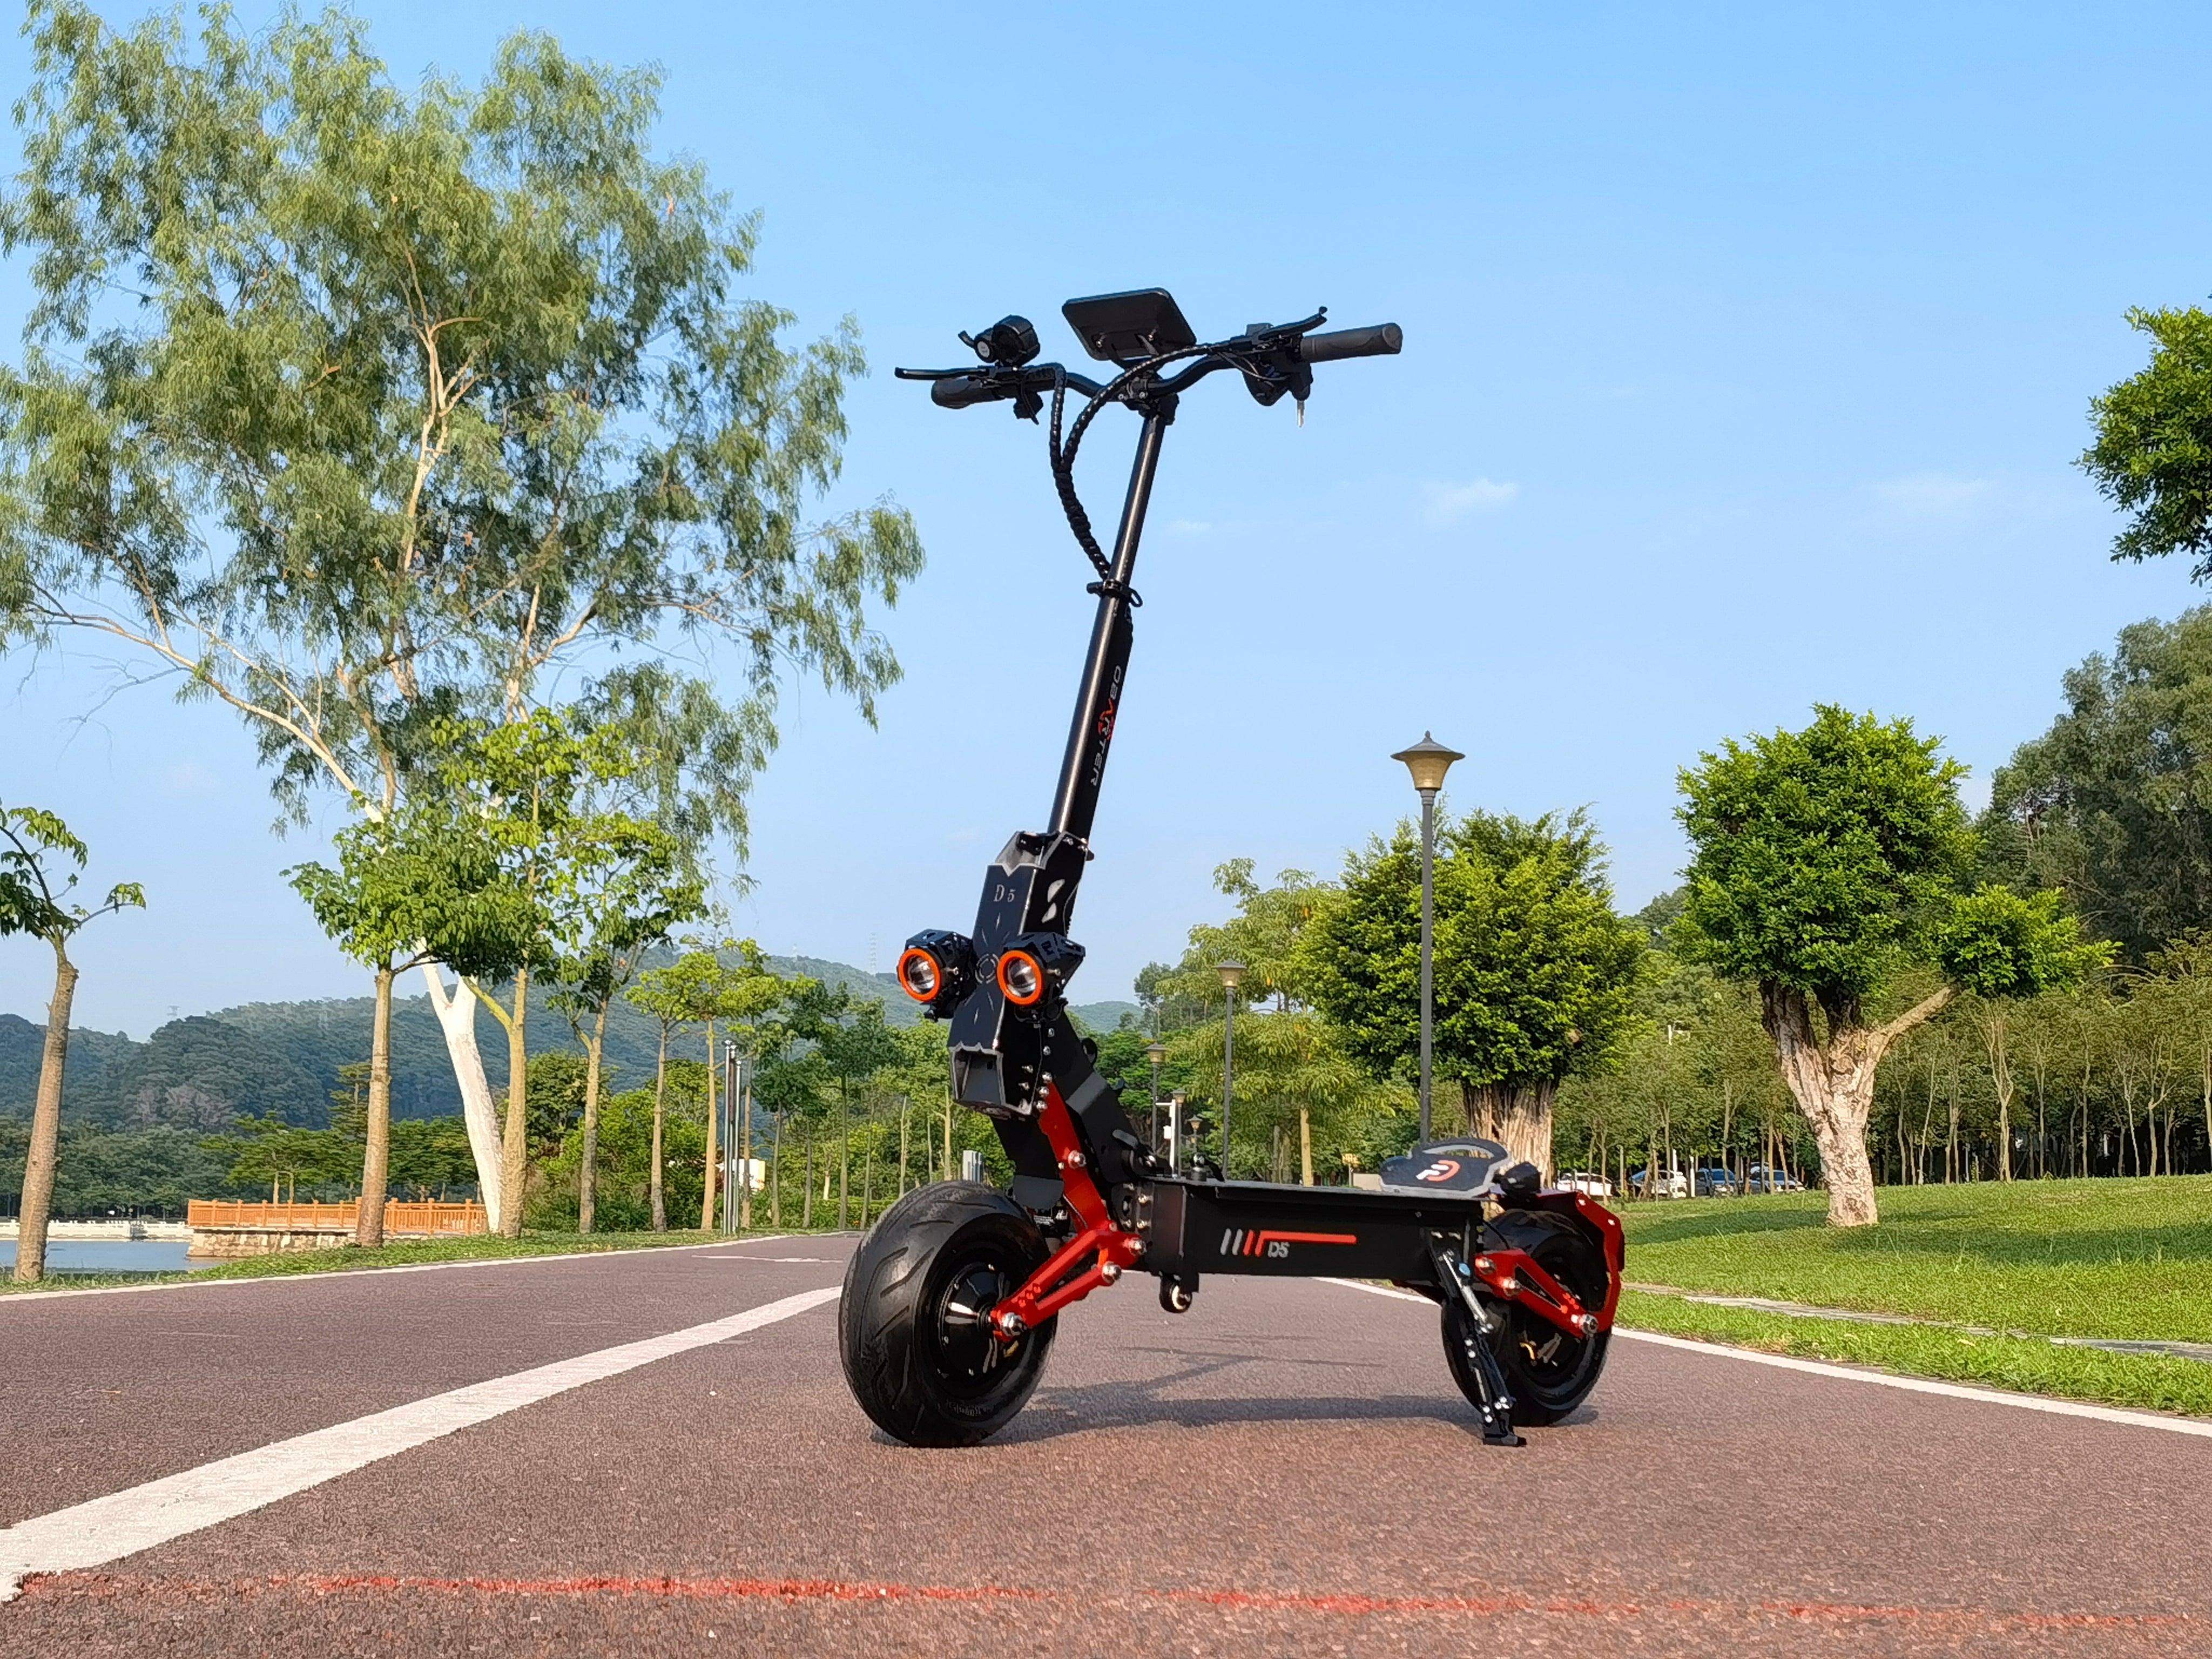 OBARTER D5 12" 2500W*2 Dual Motor Off-road Electric Scooter 48V 35Ah 70km/h 120km - Buybestgear